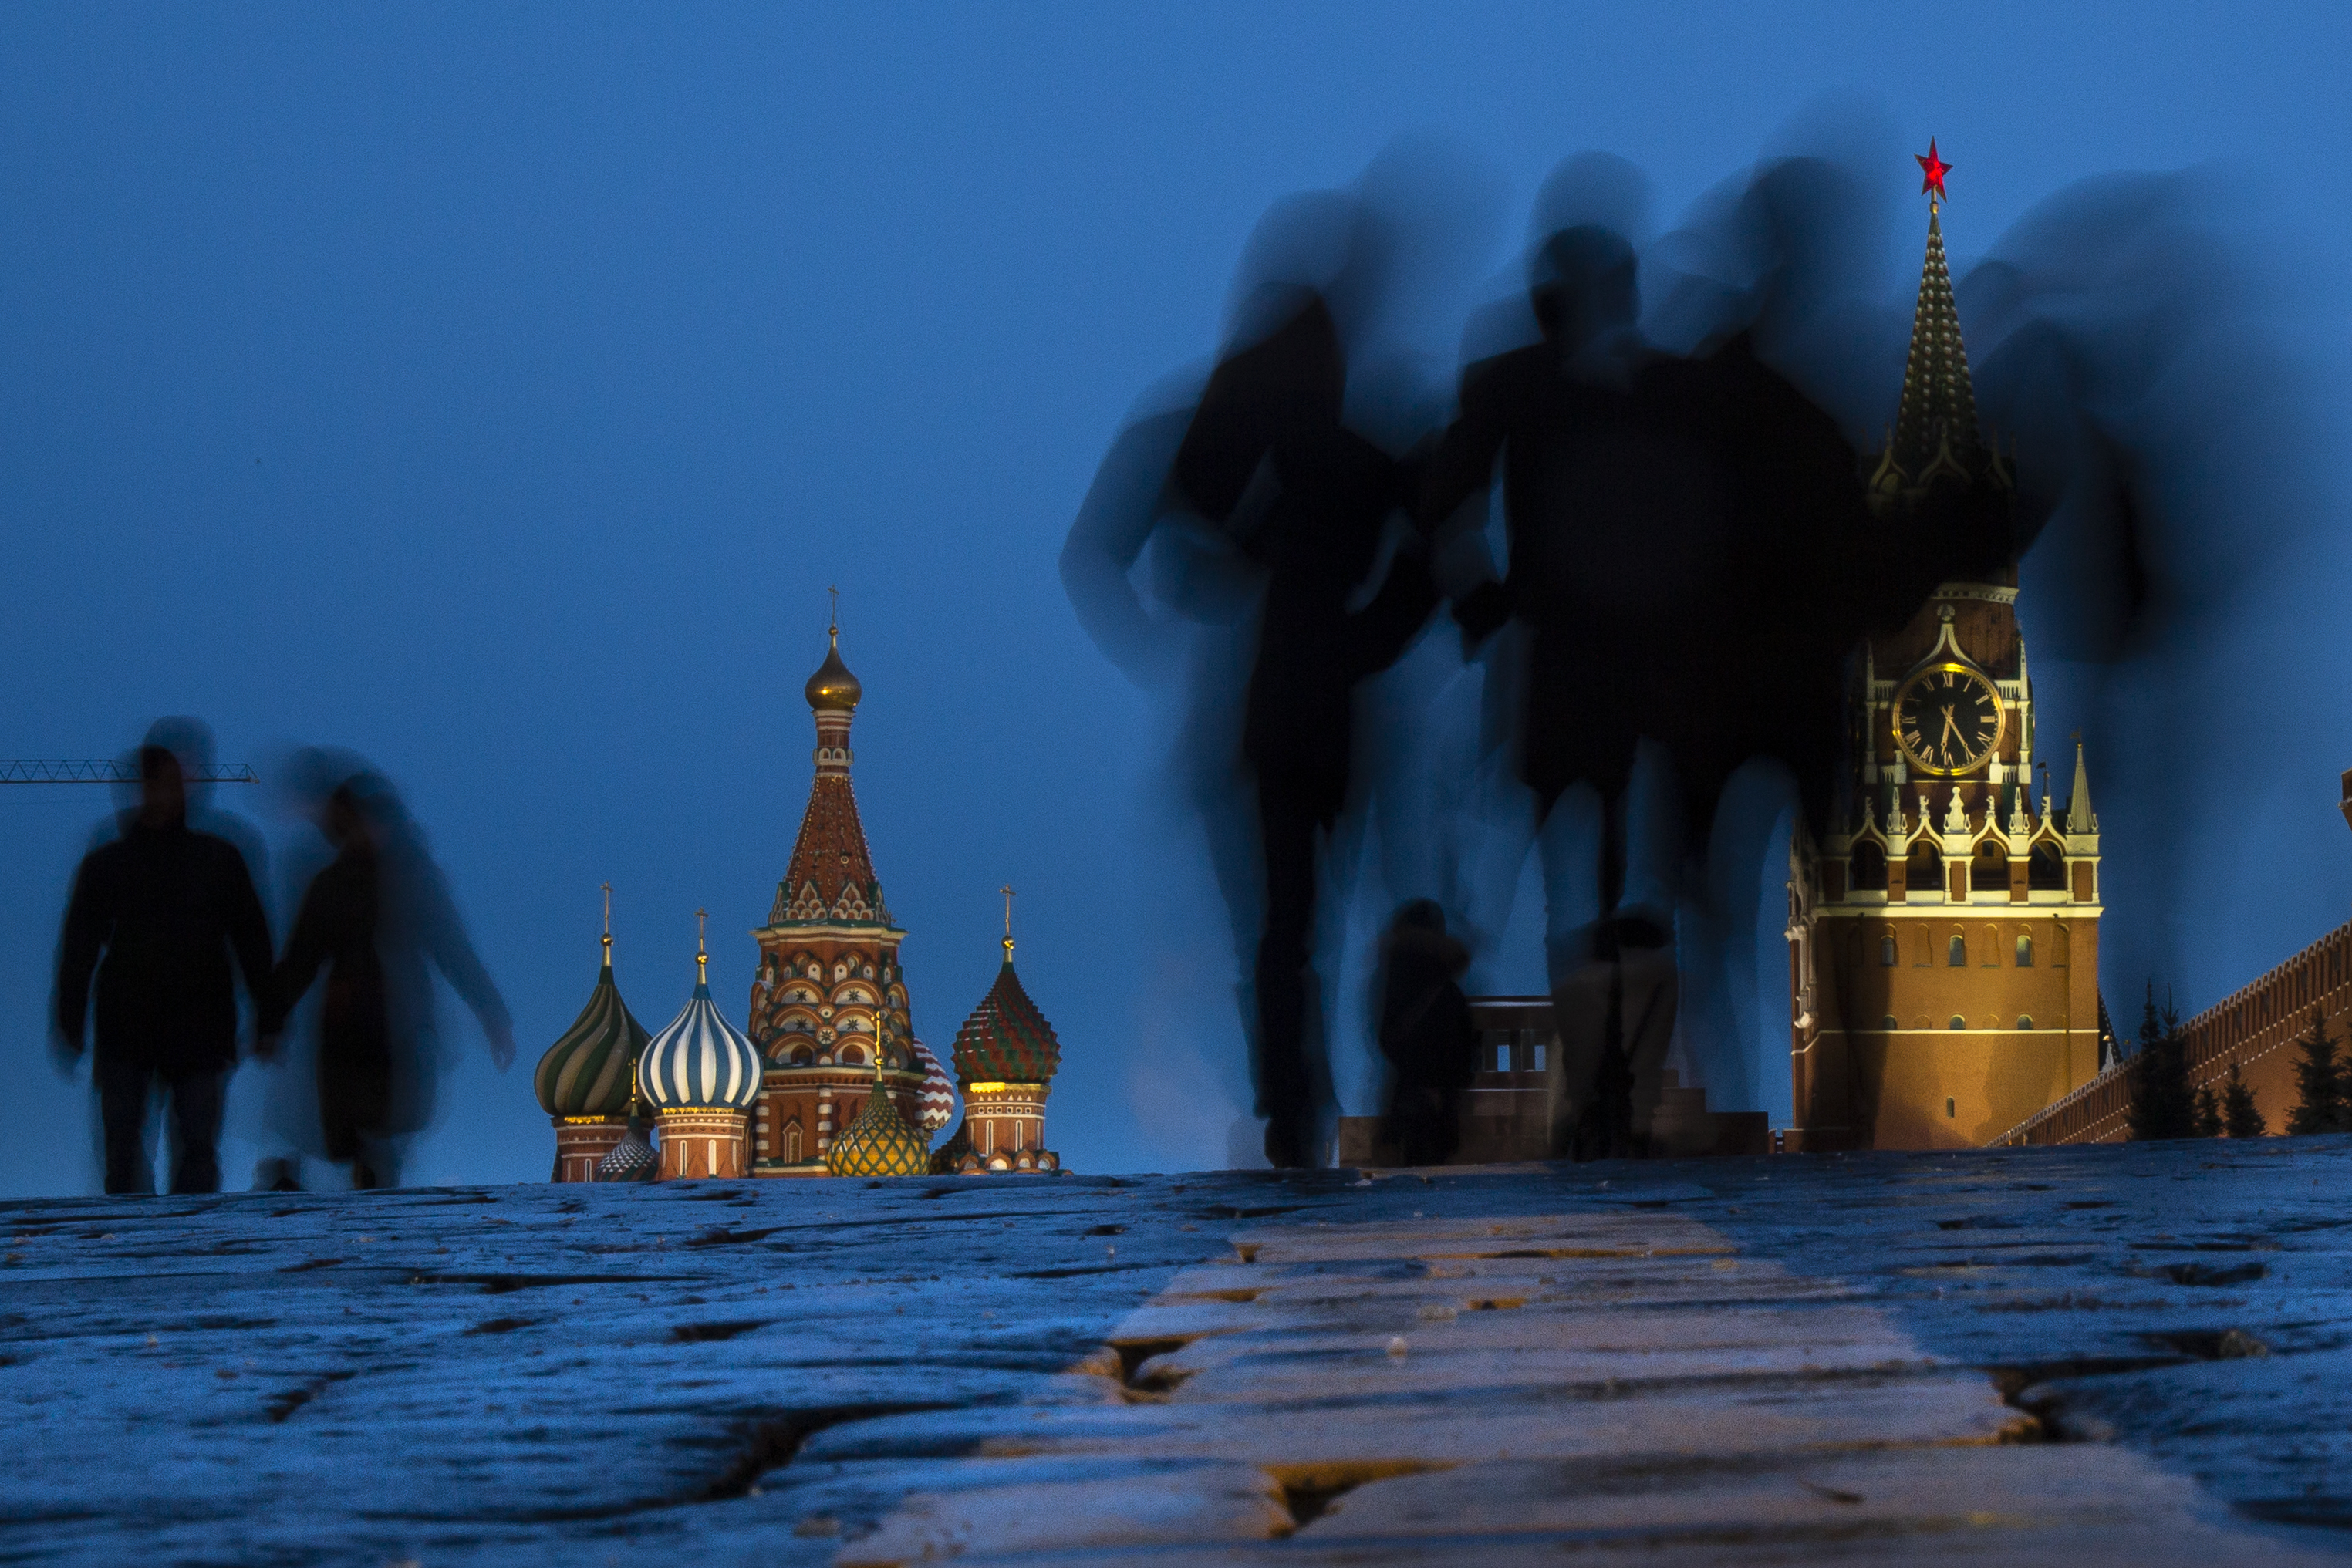 People walk through Red Square after sunset in Moscow, Russia, Sunday, March 3, 2019, with the St. Basil's background left, and the Spasskaya Tower, right, in the background. (AP Photo/Alexander Zemlianichenko)